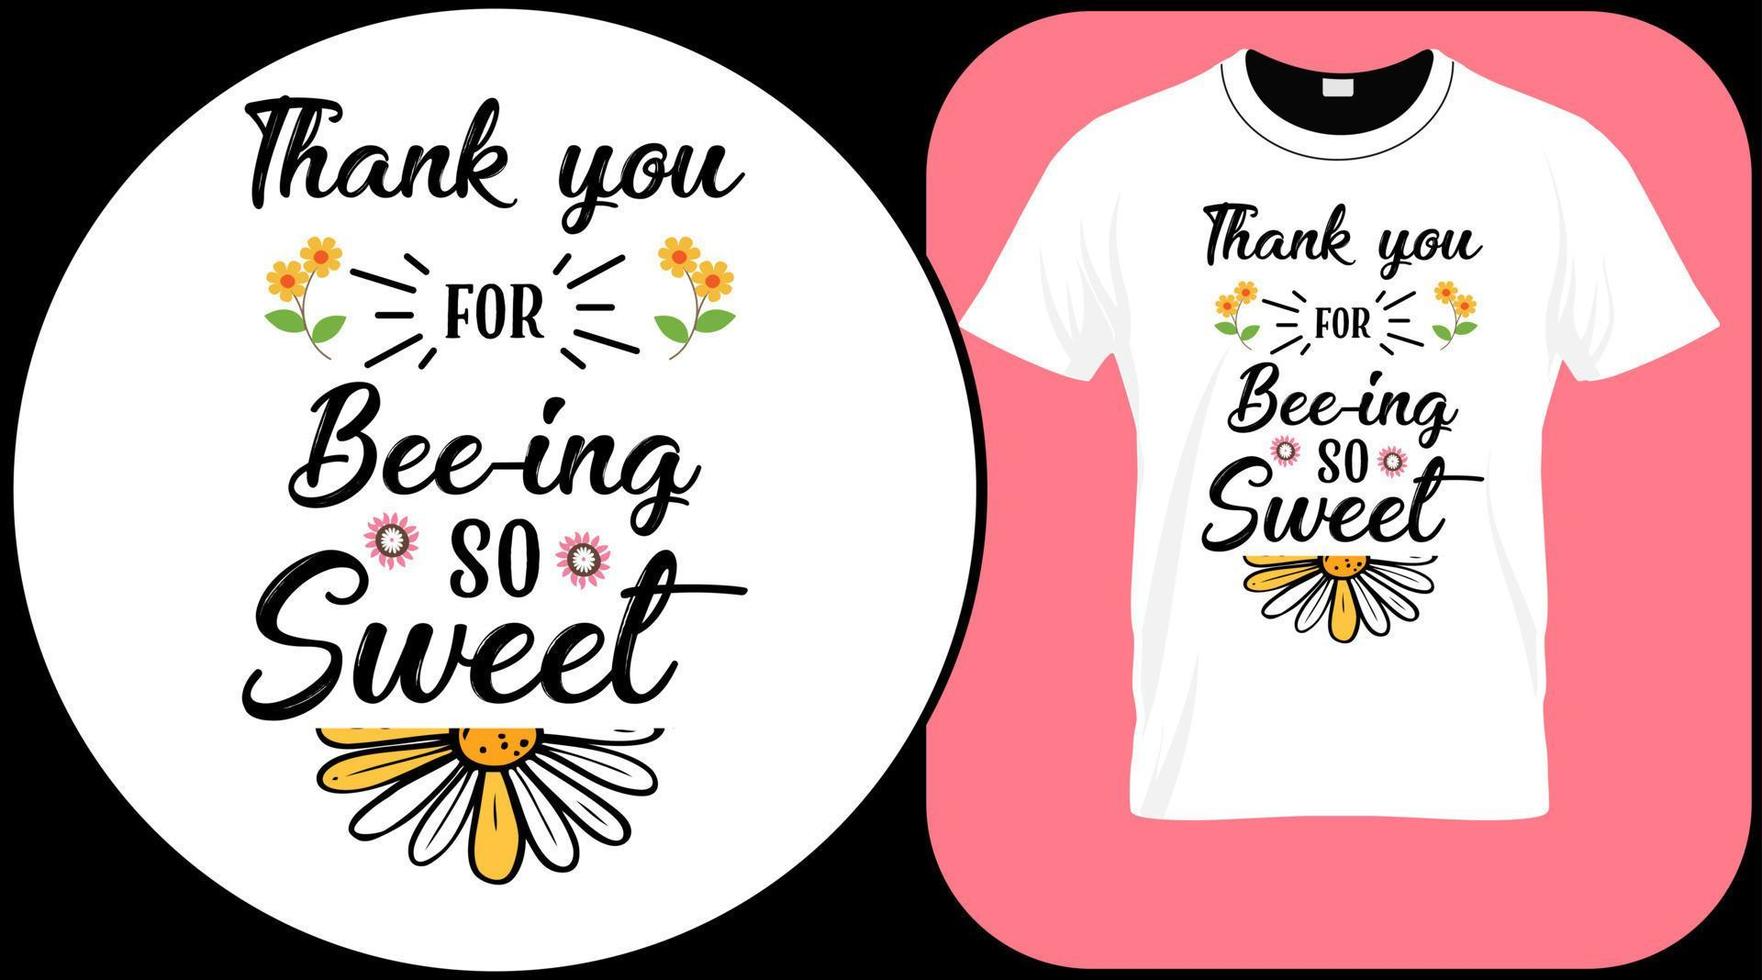 thank you for bee-ing so sweet, funny bee quote isolated on white background. Honey bee hand drawn lettering. Sweet honey love summer quote saying. Typography vector print illustration for t shirt